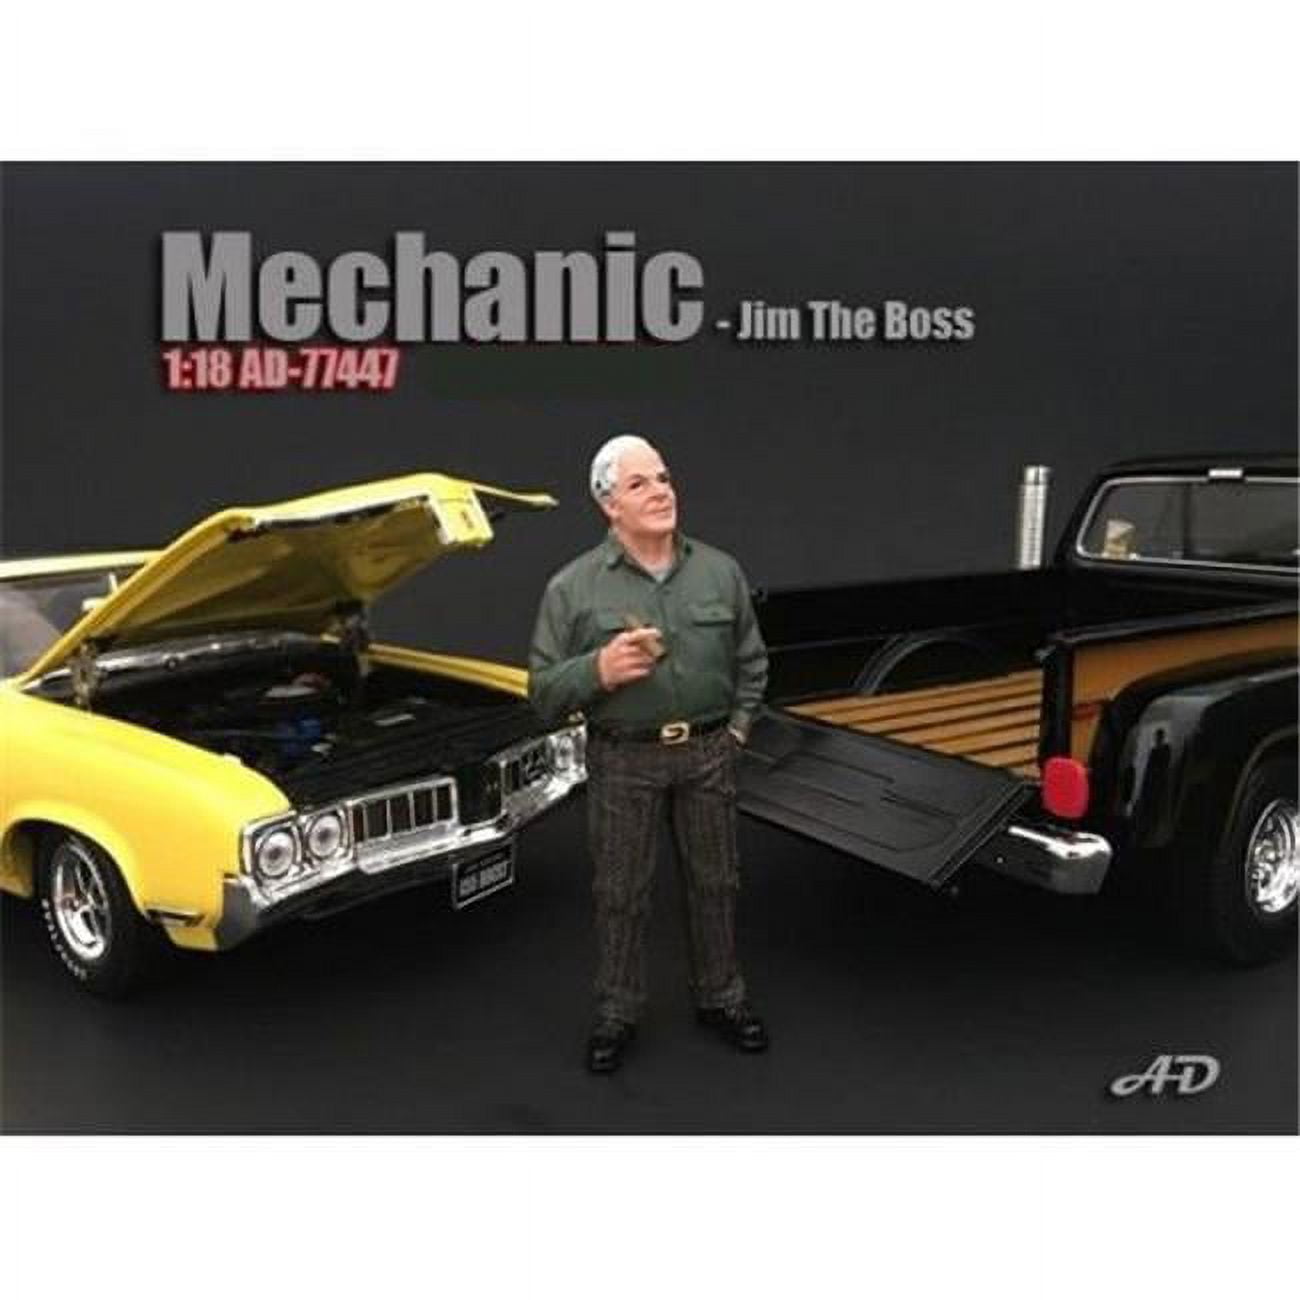 Picture of American Diorama 77447 Mechanic Jim the Boss Figurine for 1 isto 18 Models